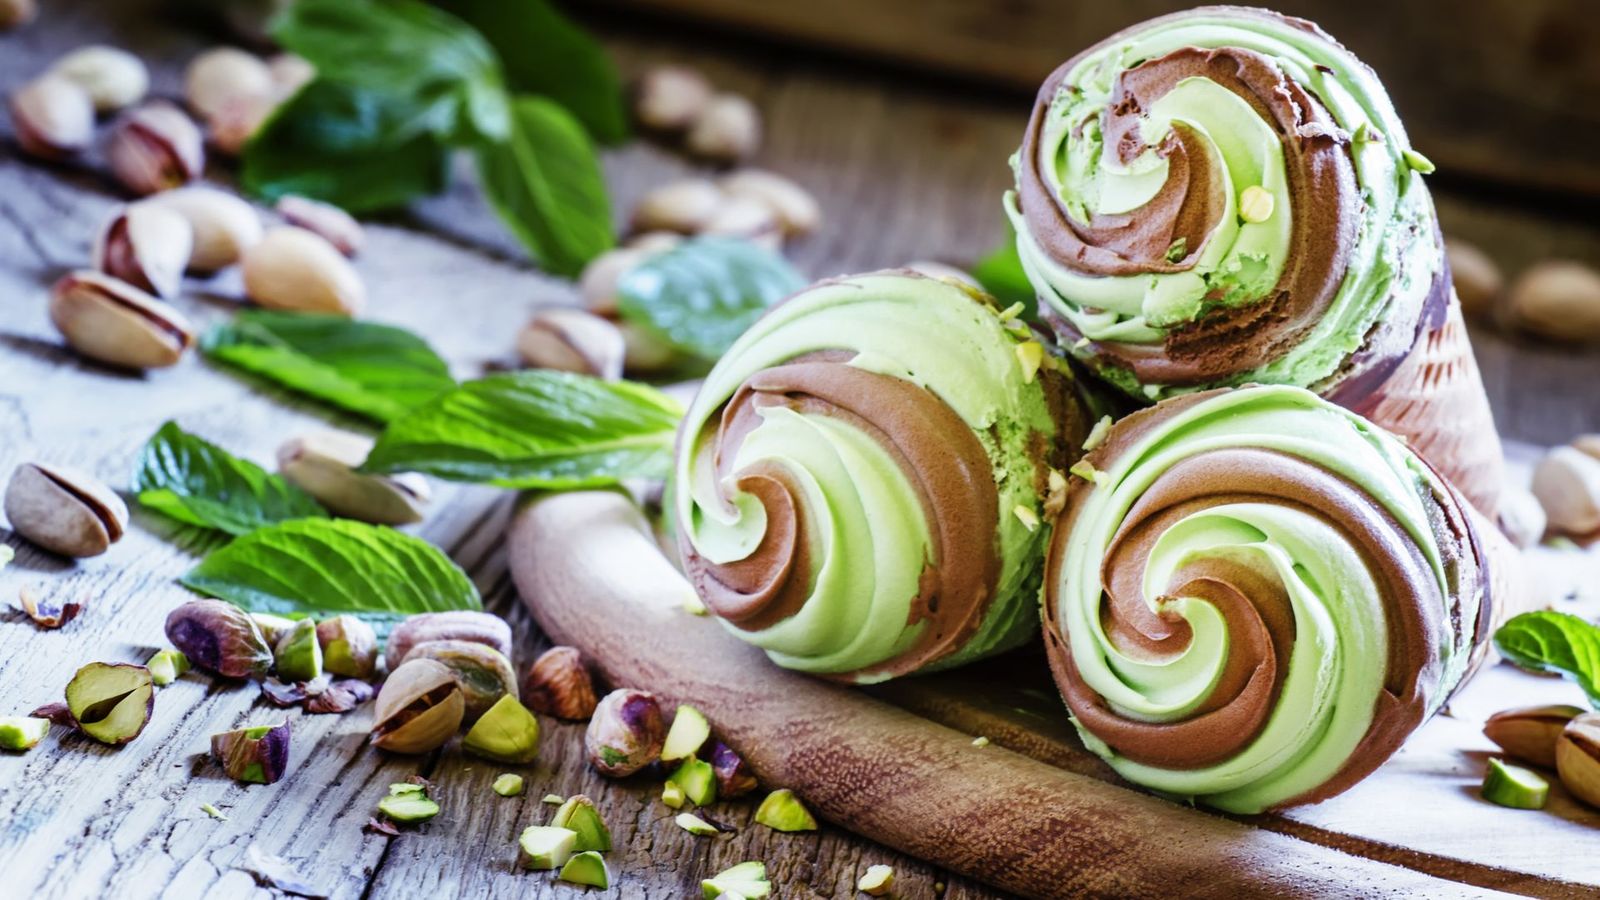 🍰 Don’t Freak Out, But We Can Guess Your Eye Color Based on the Desserts You Eat Pistachio Ice Cream